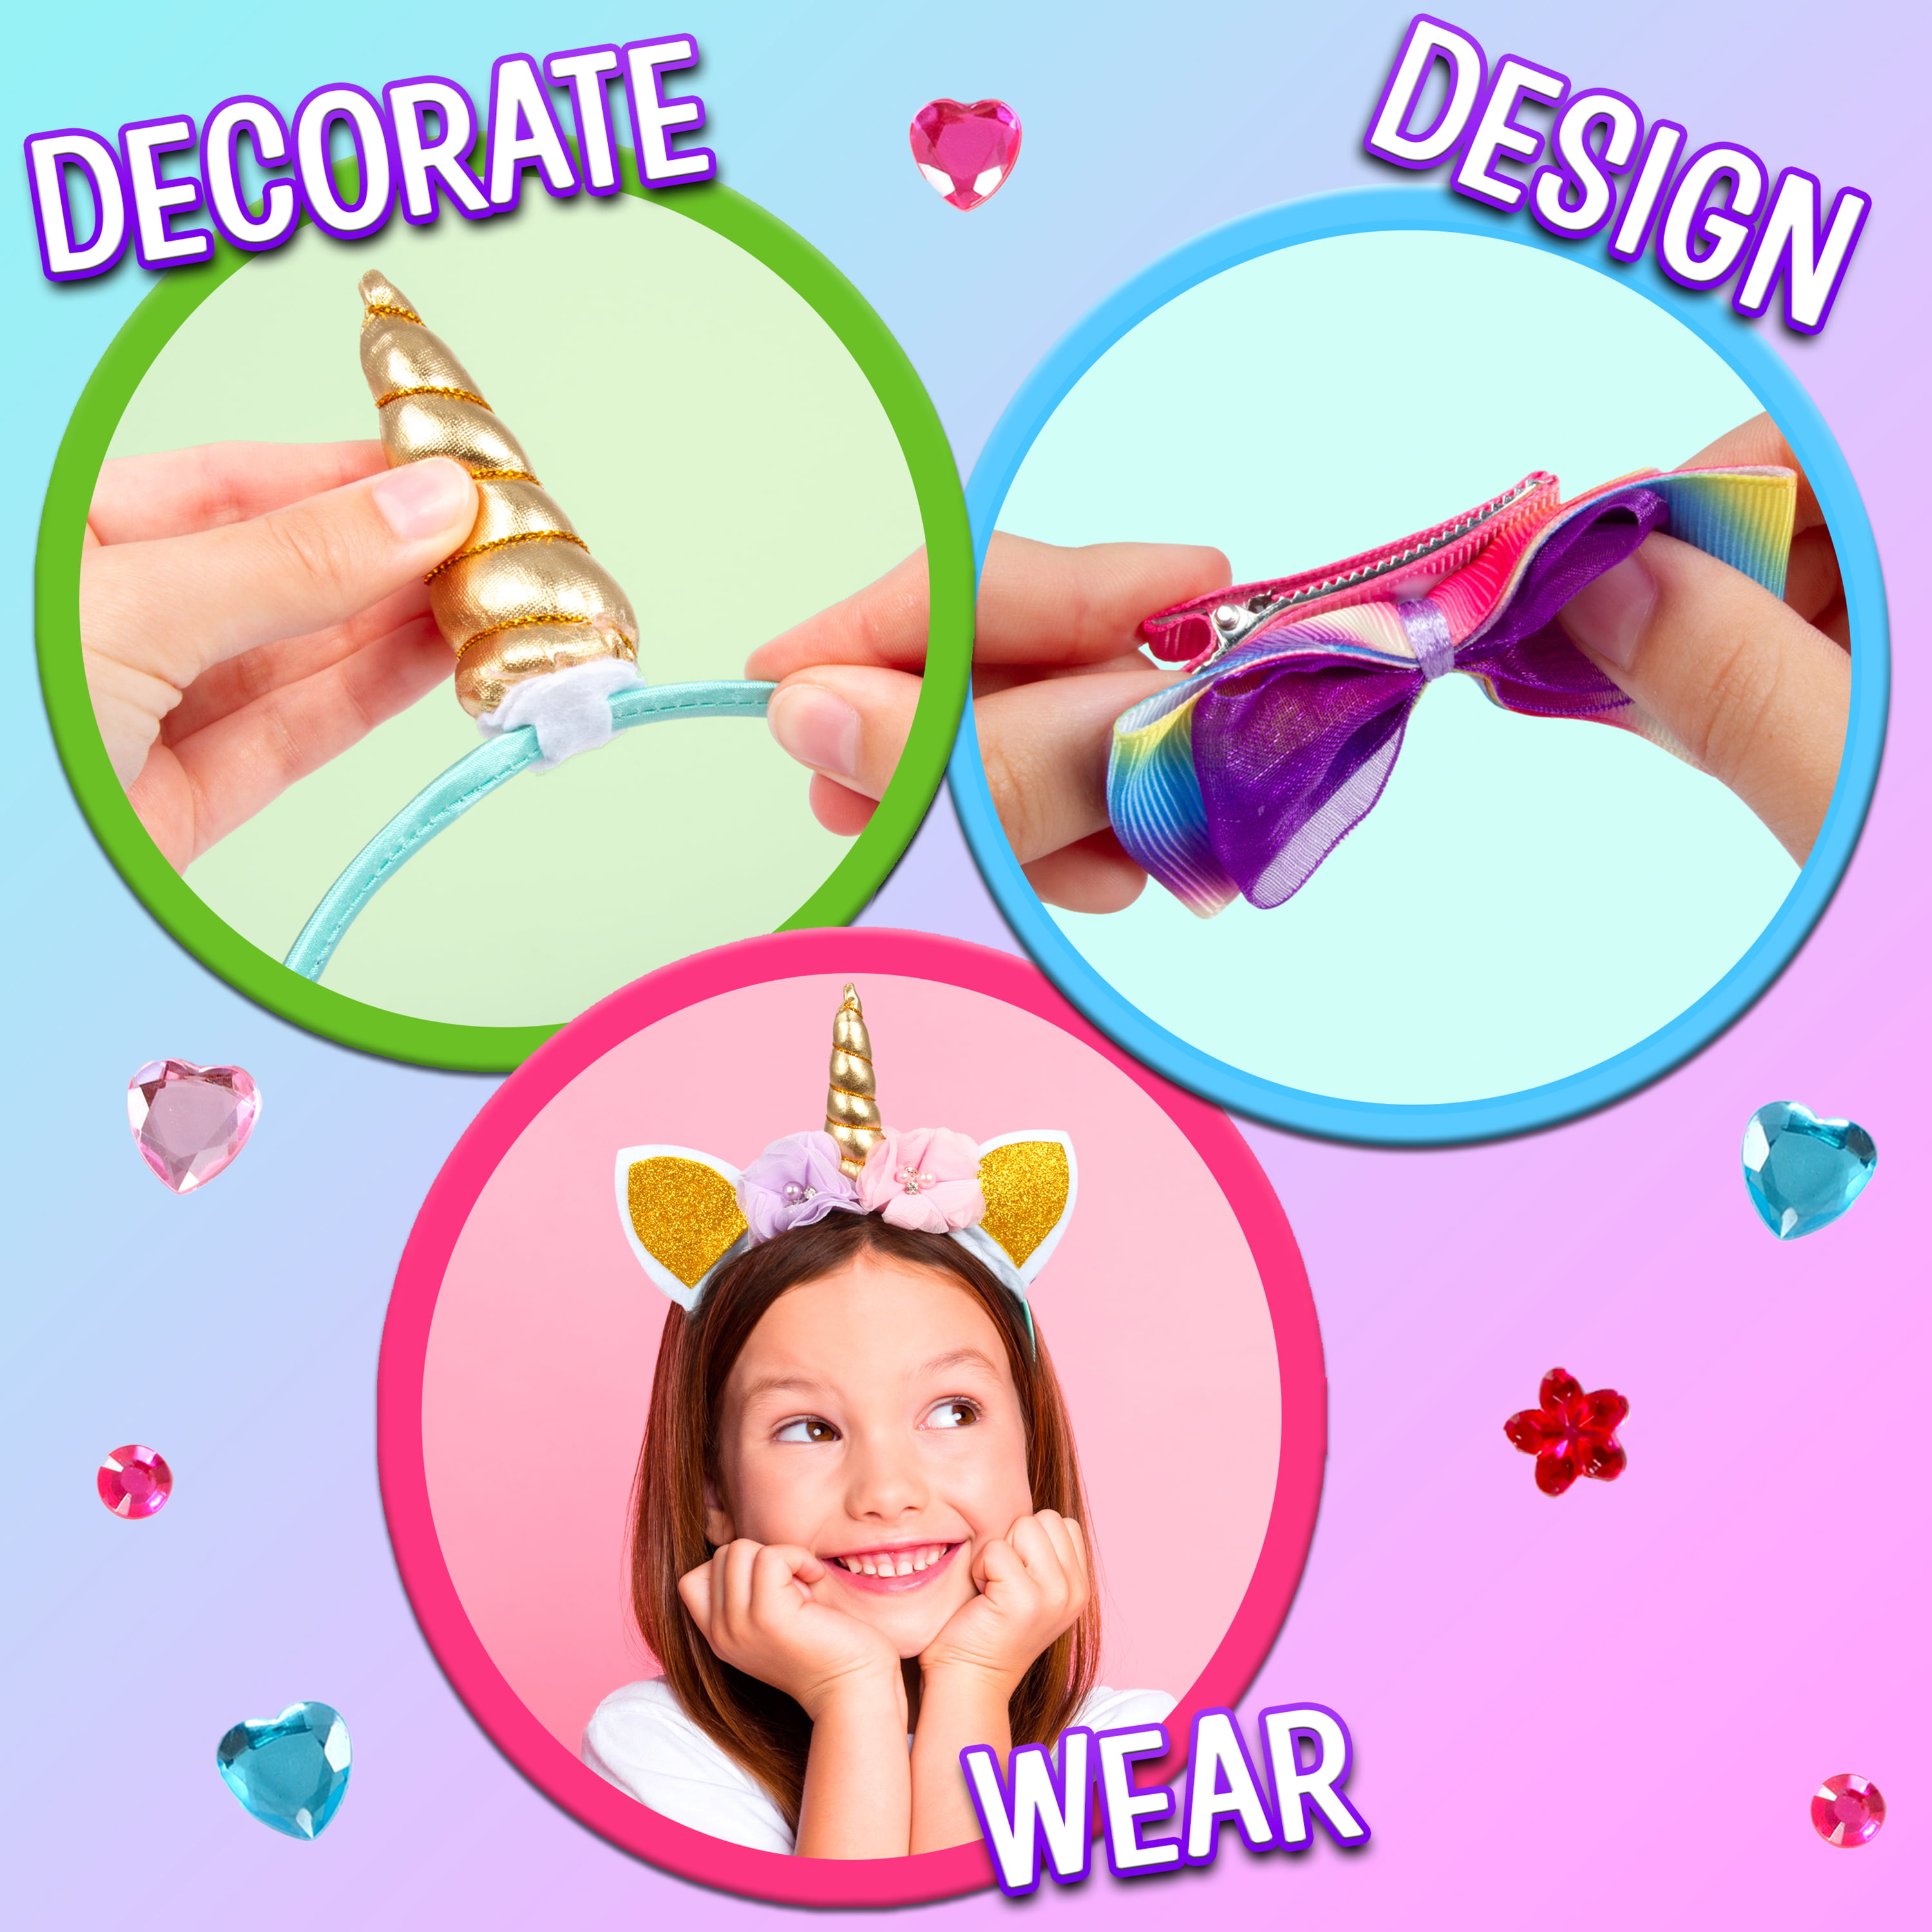  Creativity for Kids Ice Dye Headbands Craft Kit - Create 5 DIY  Tie Dye Headbands, Arts and Craft Tie Dye Kit, Gifts for Kids Age 7, 8-12+  : Toys & Games